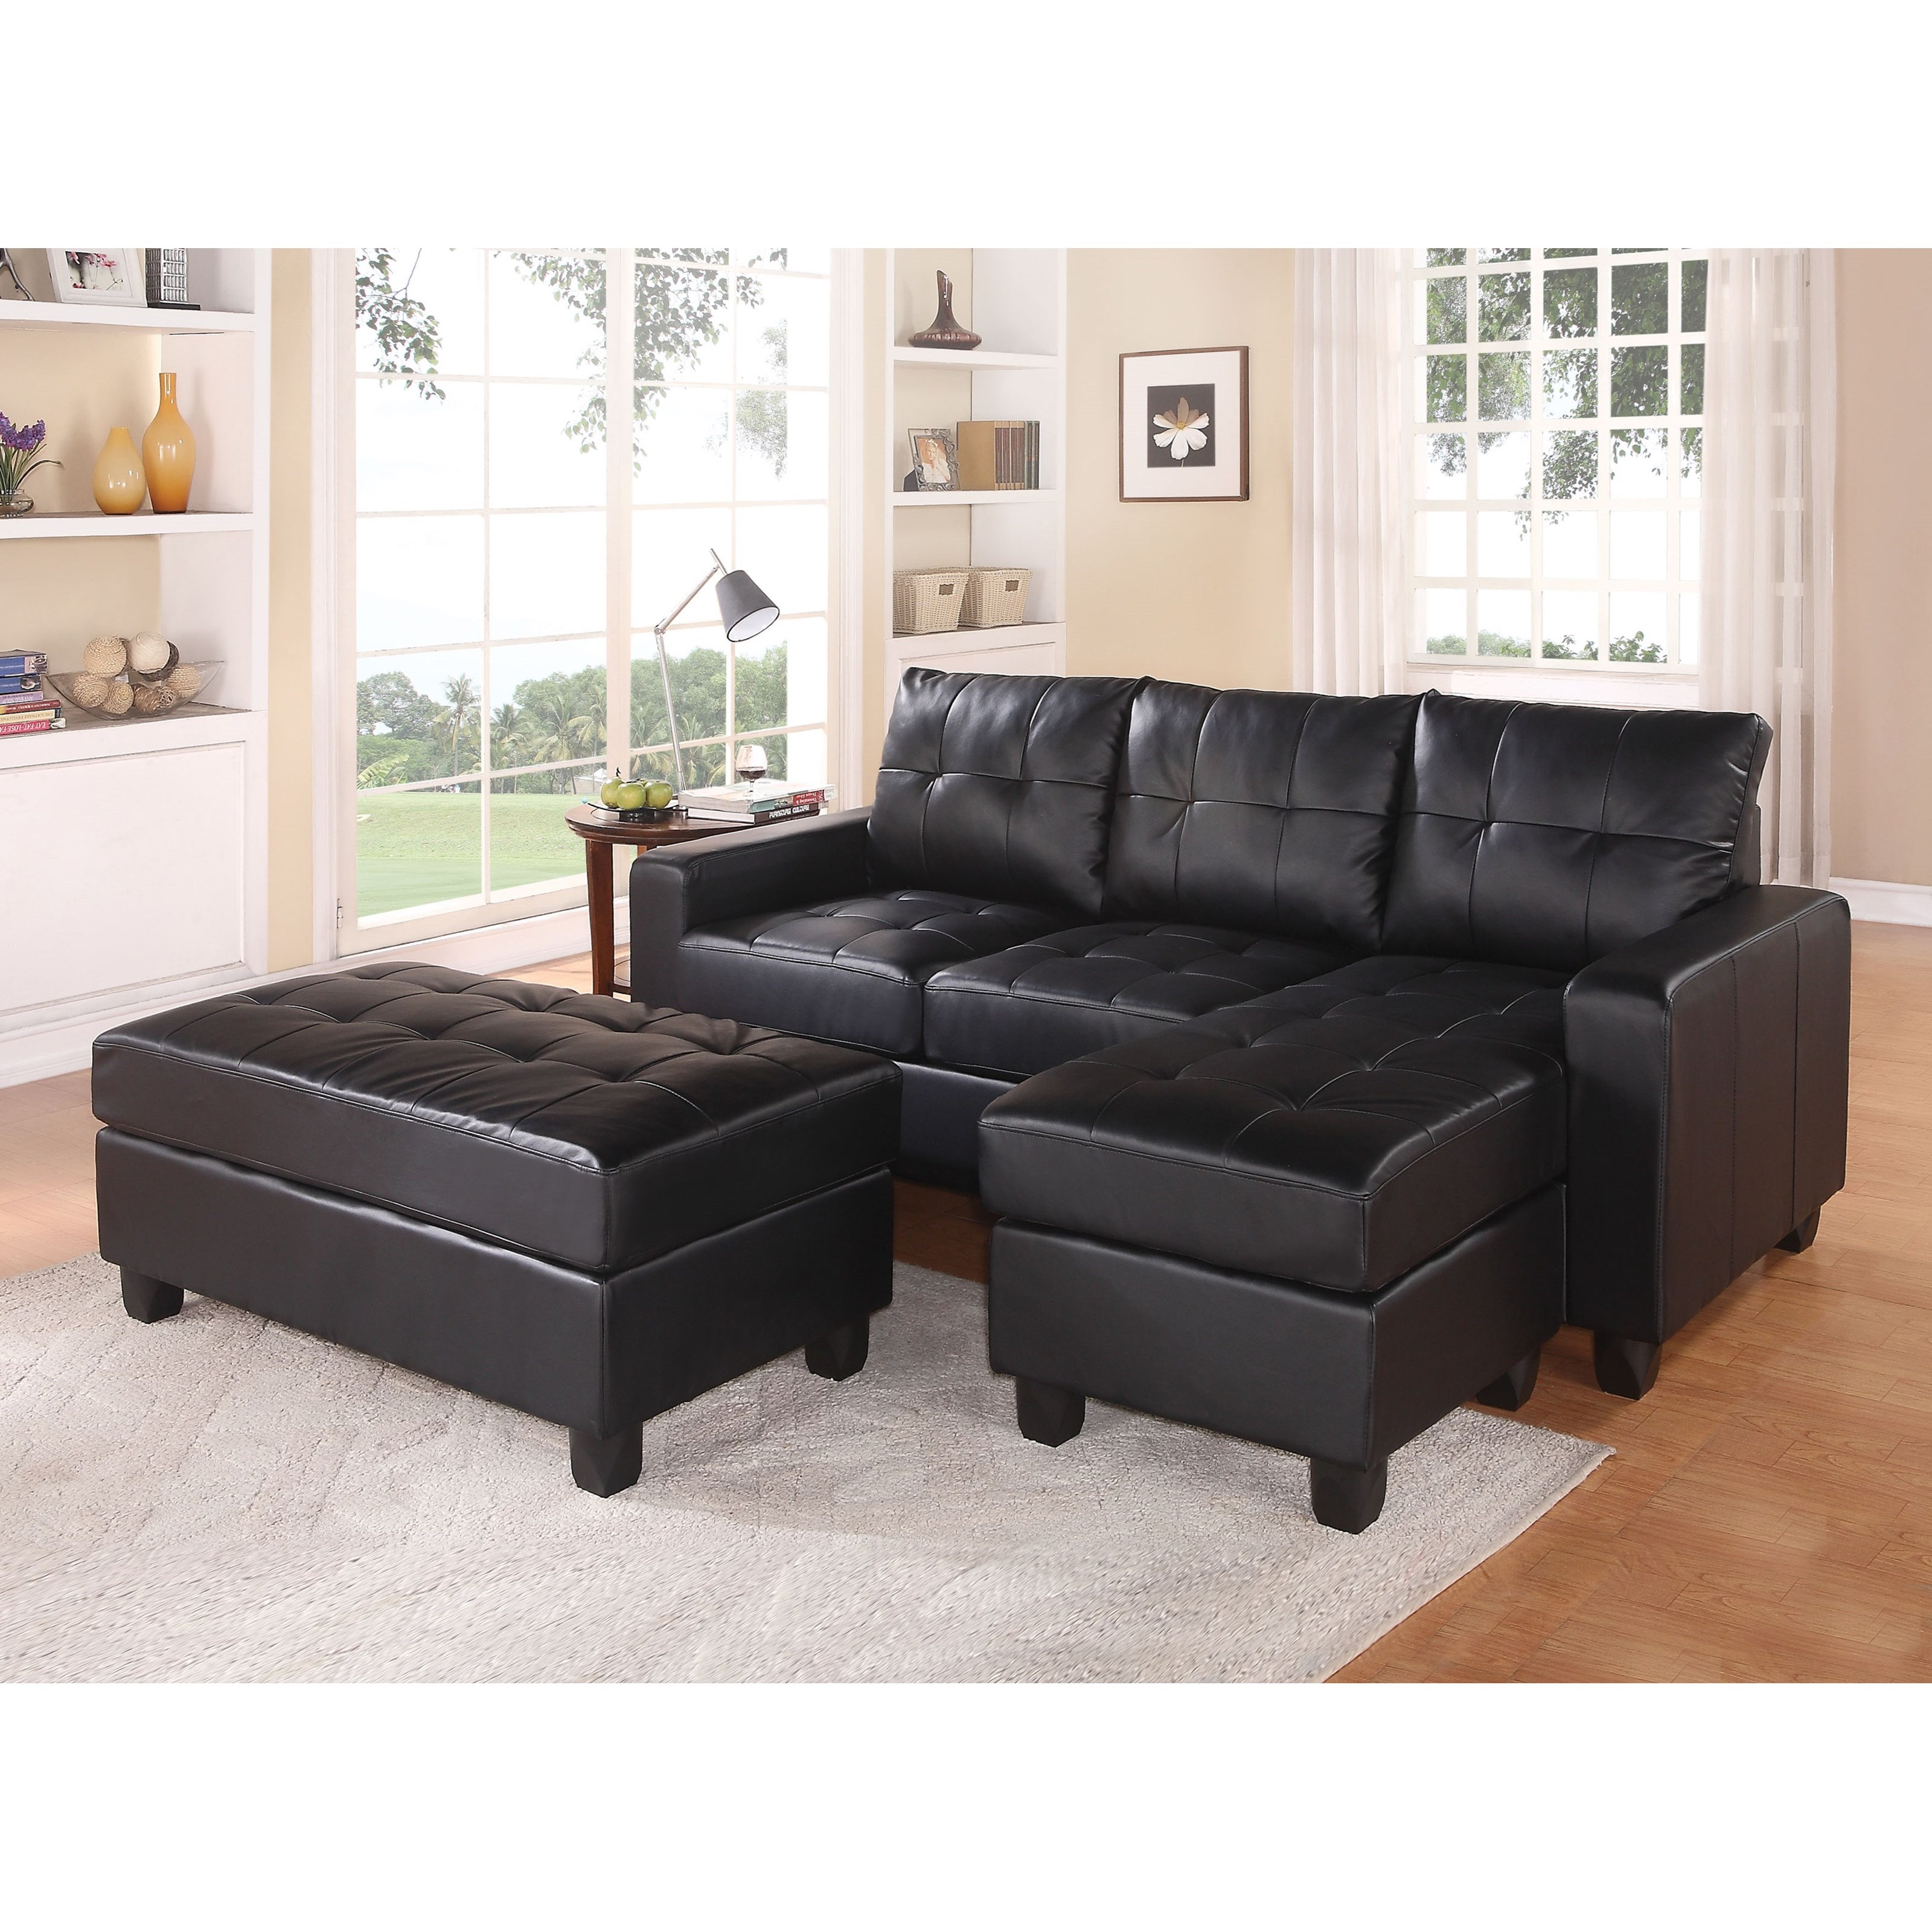 Sofa Chaise Ottoman Bonded Leather White Modern Reversible Sectional Couch Set 